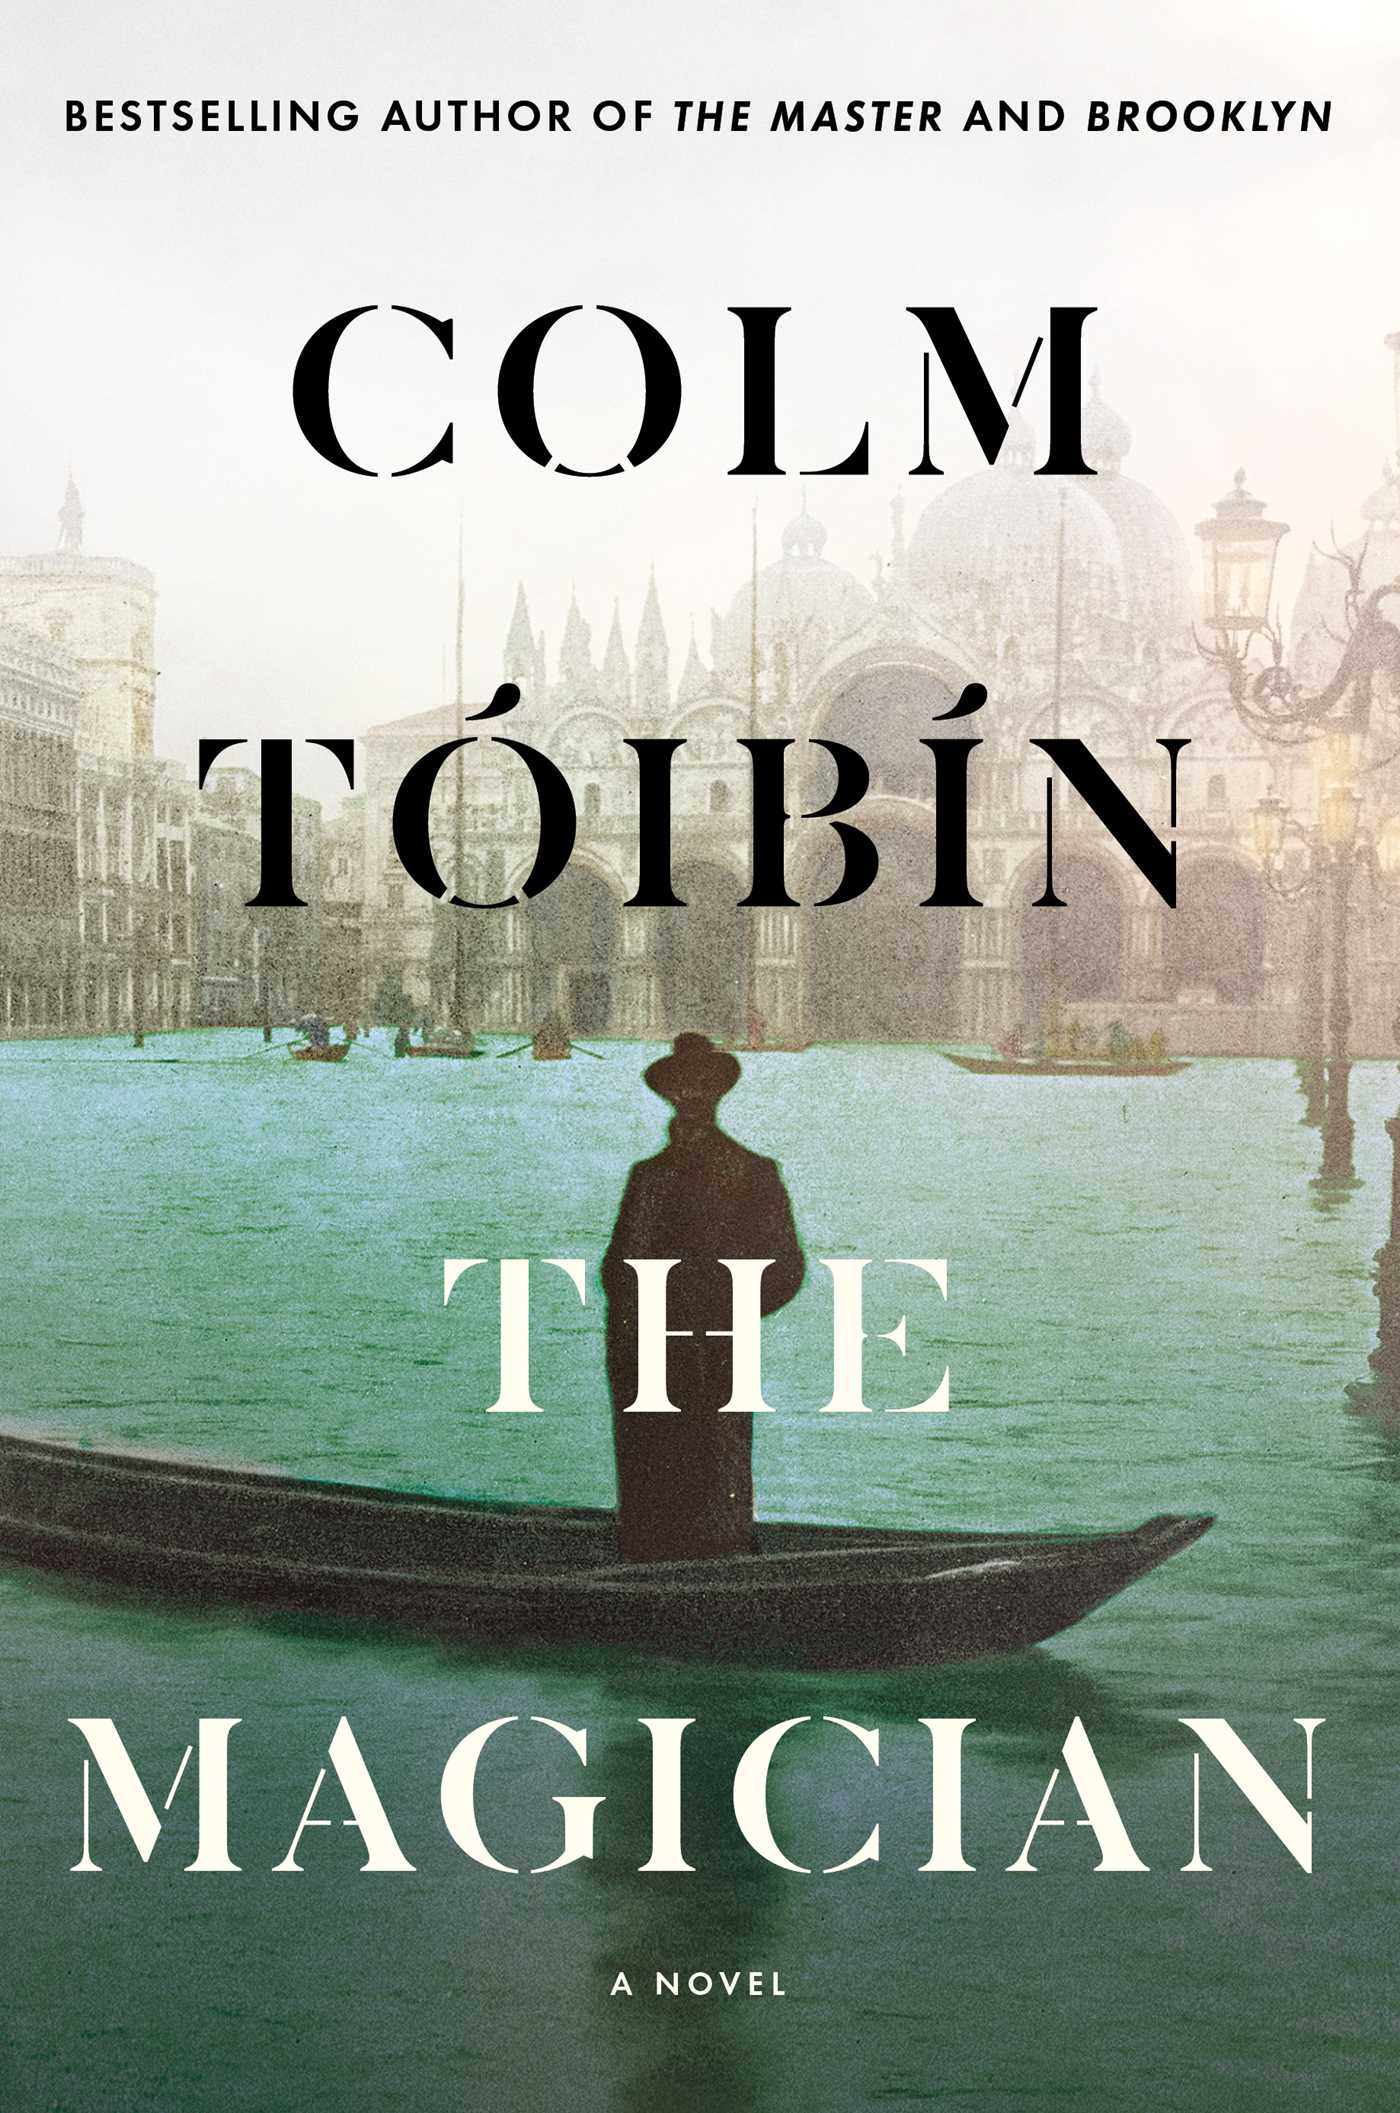 Image of the book cover of the novel The Magician by Colm Toibin featuring muted colors and a dark figure of a man in a hat and long coat standing in a gondola surrounded by architecturally beautiful buildings on what appears to be the waterways in Venice, Italy. Beautiful ar